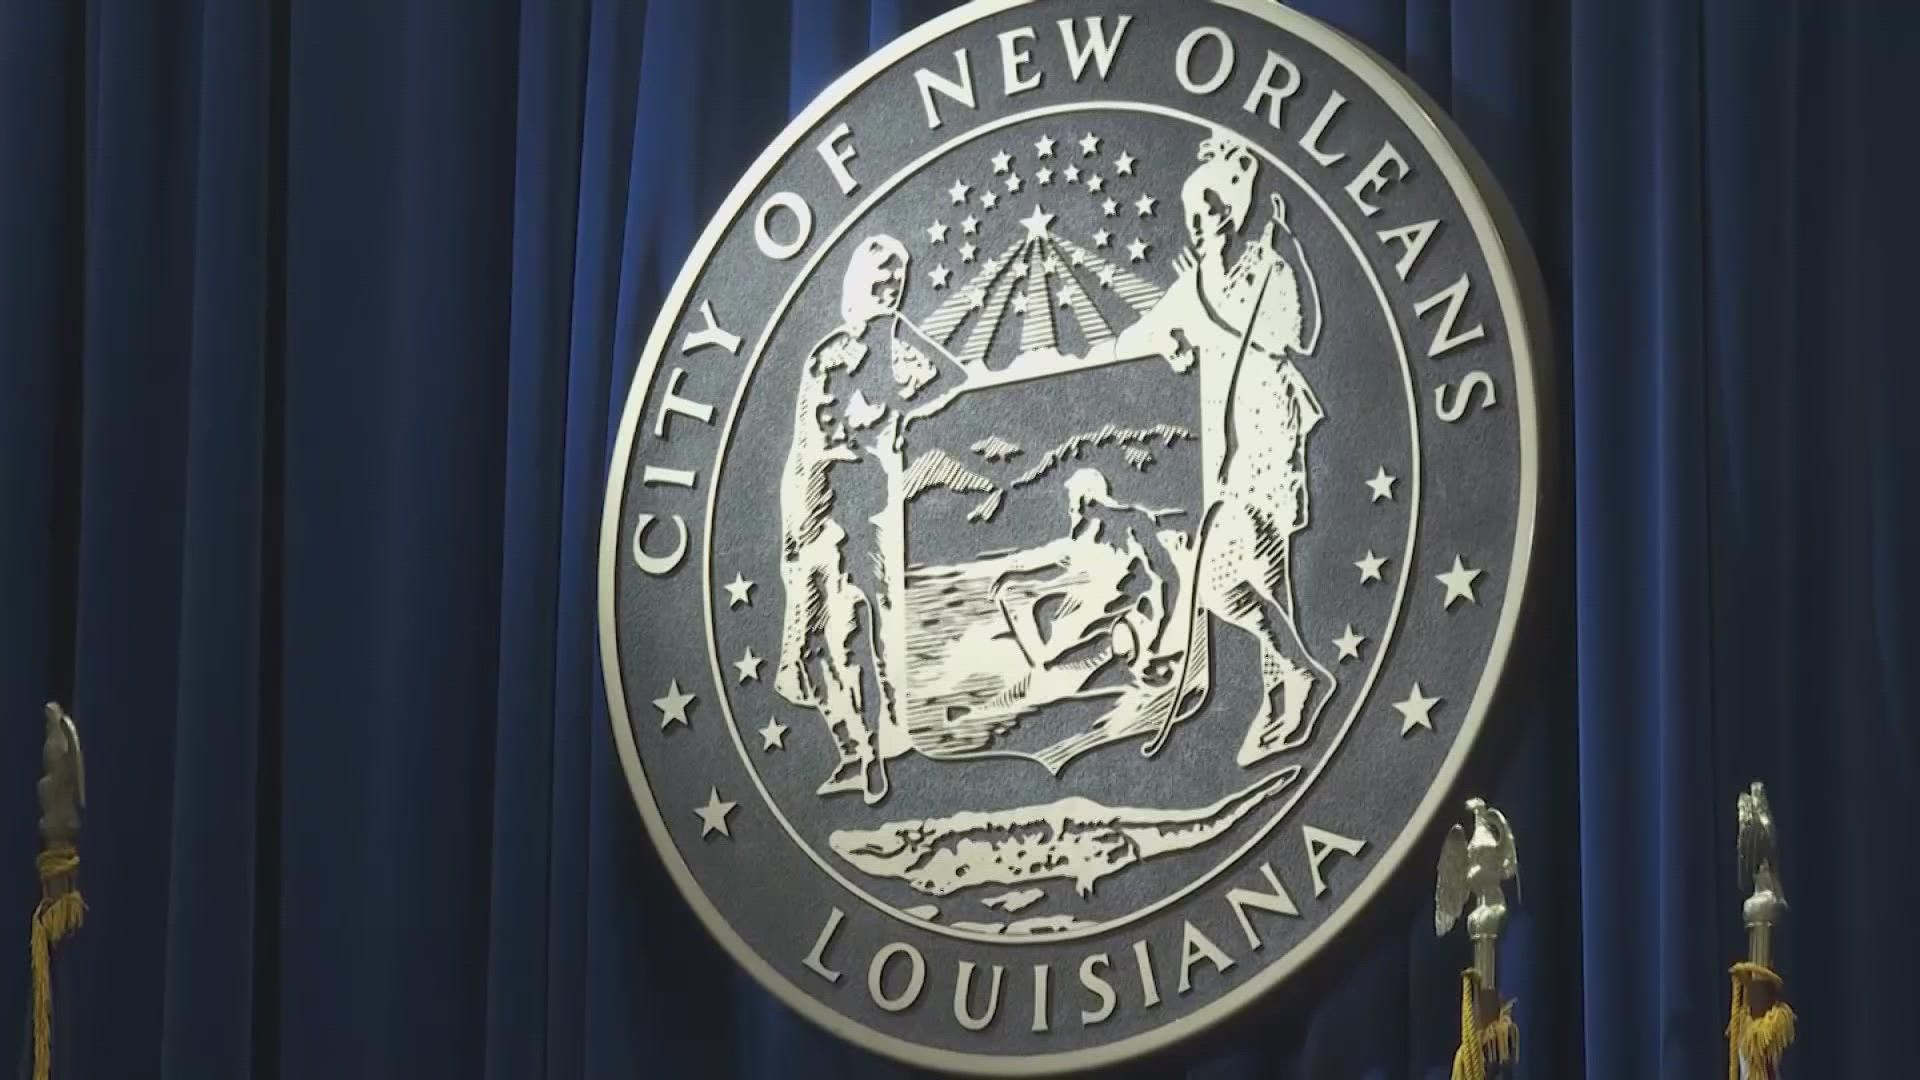 Voters in Orleans Parish solidly backed a measure that would have the city council having to approve future major mayoral appointments.